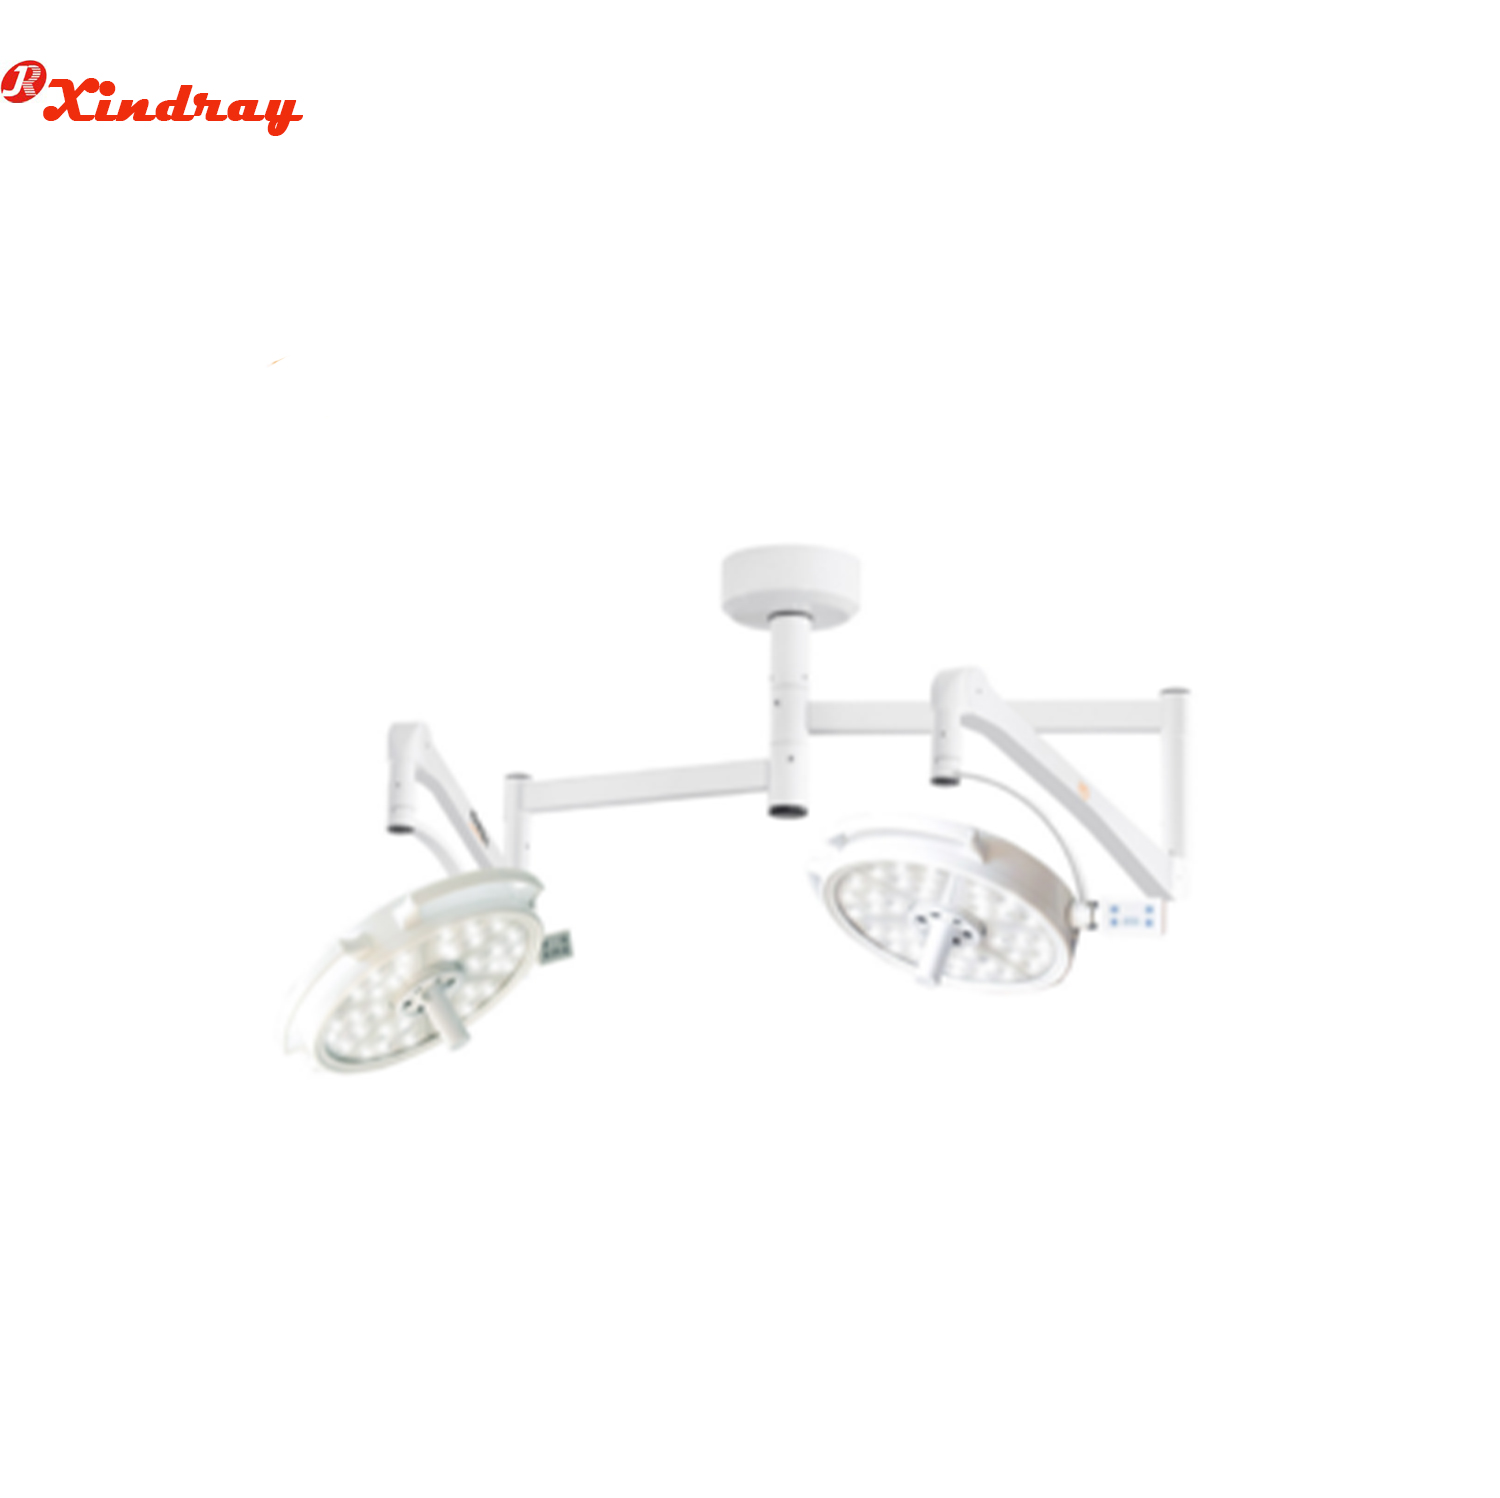  Inspection Lamp with Reasonable Price 